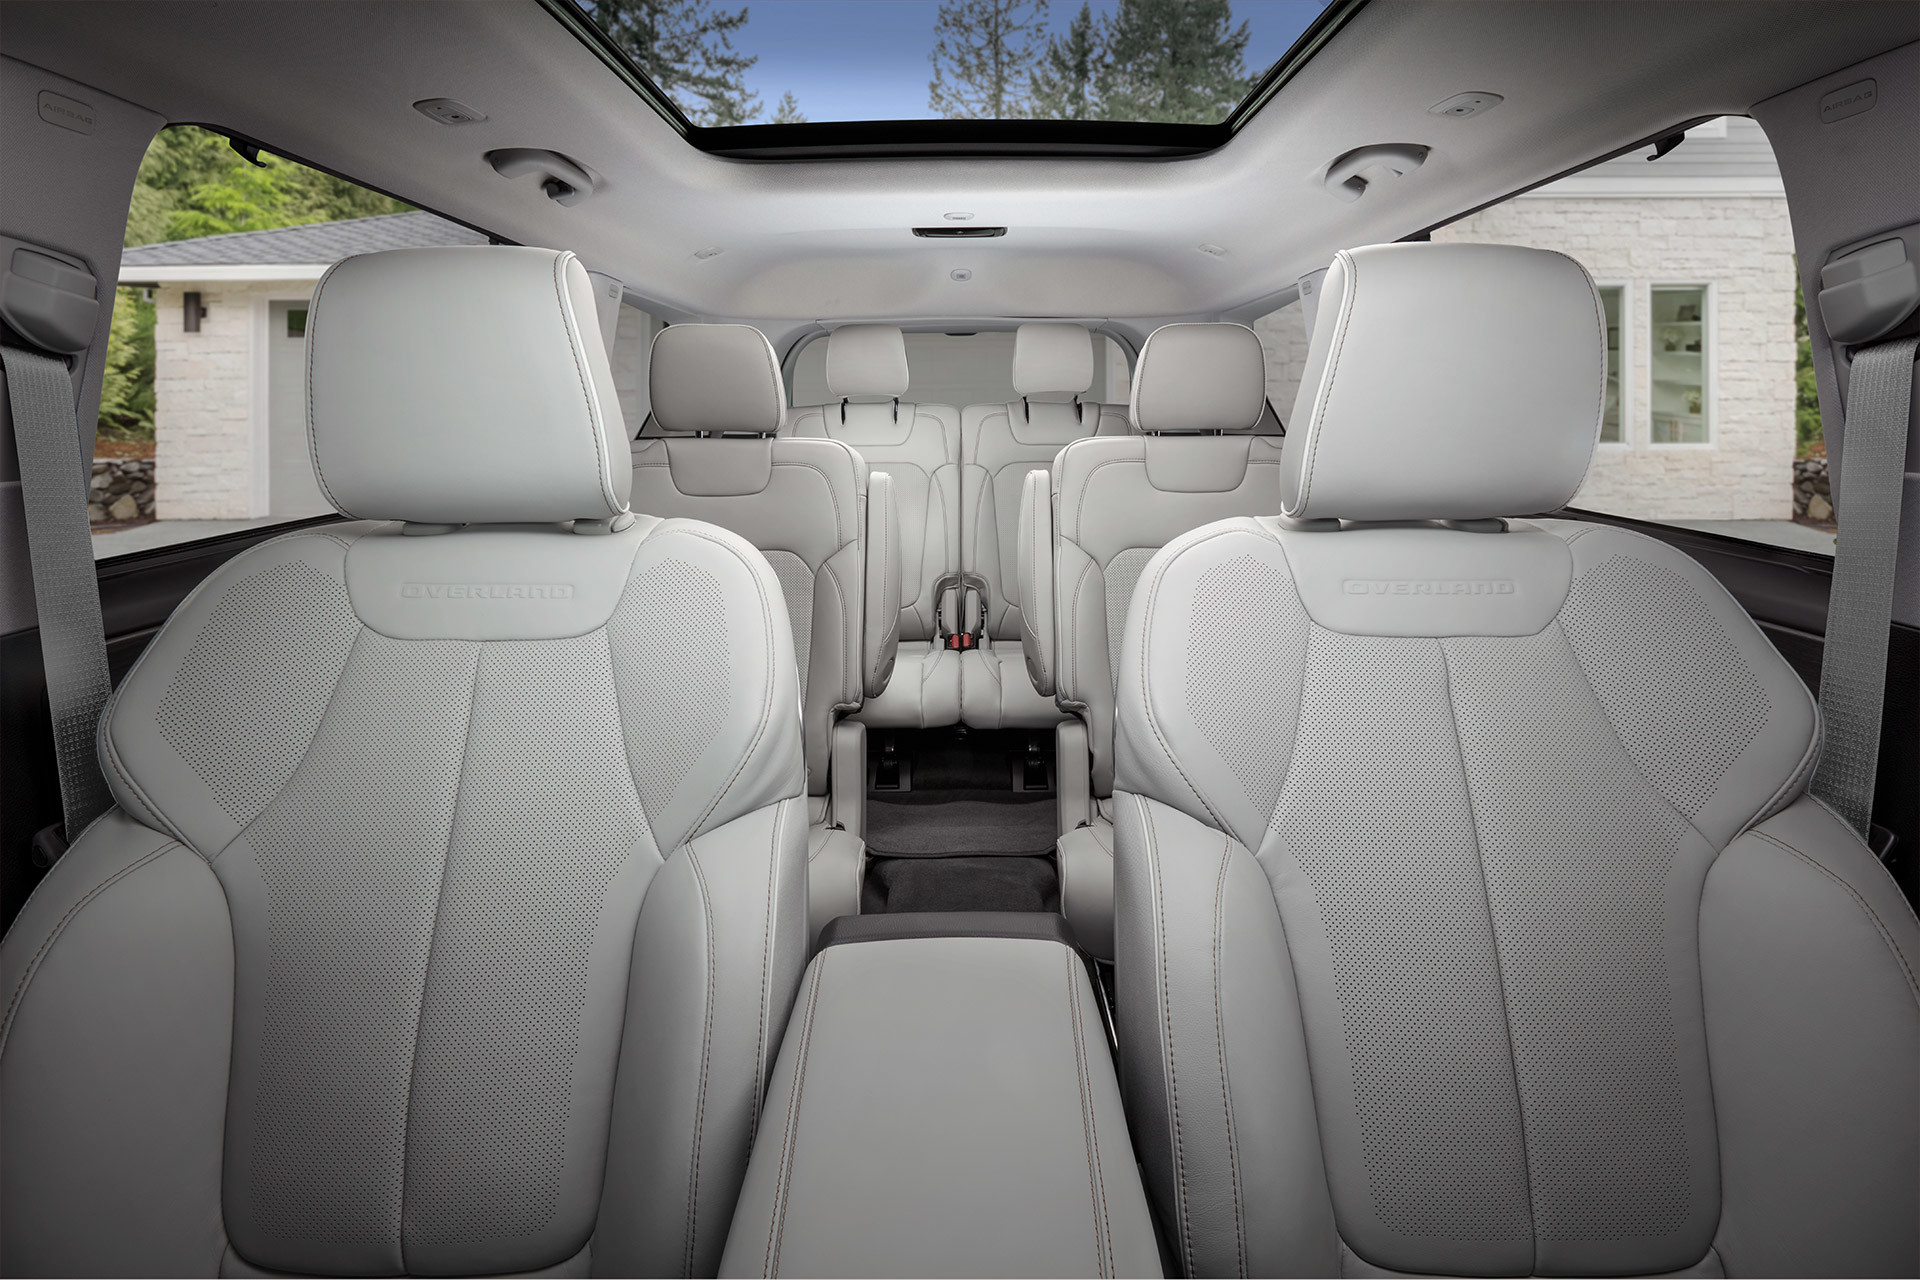 Interior shot from the front seat looking towards the back seats of the 2022 Jeep Grand Cherokee L